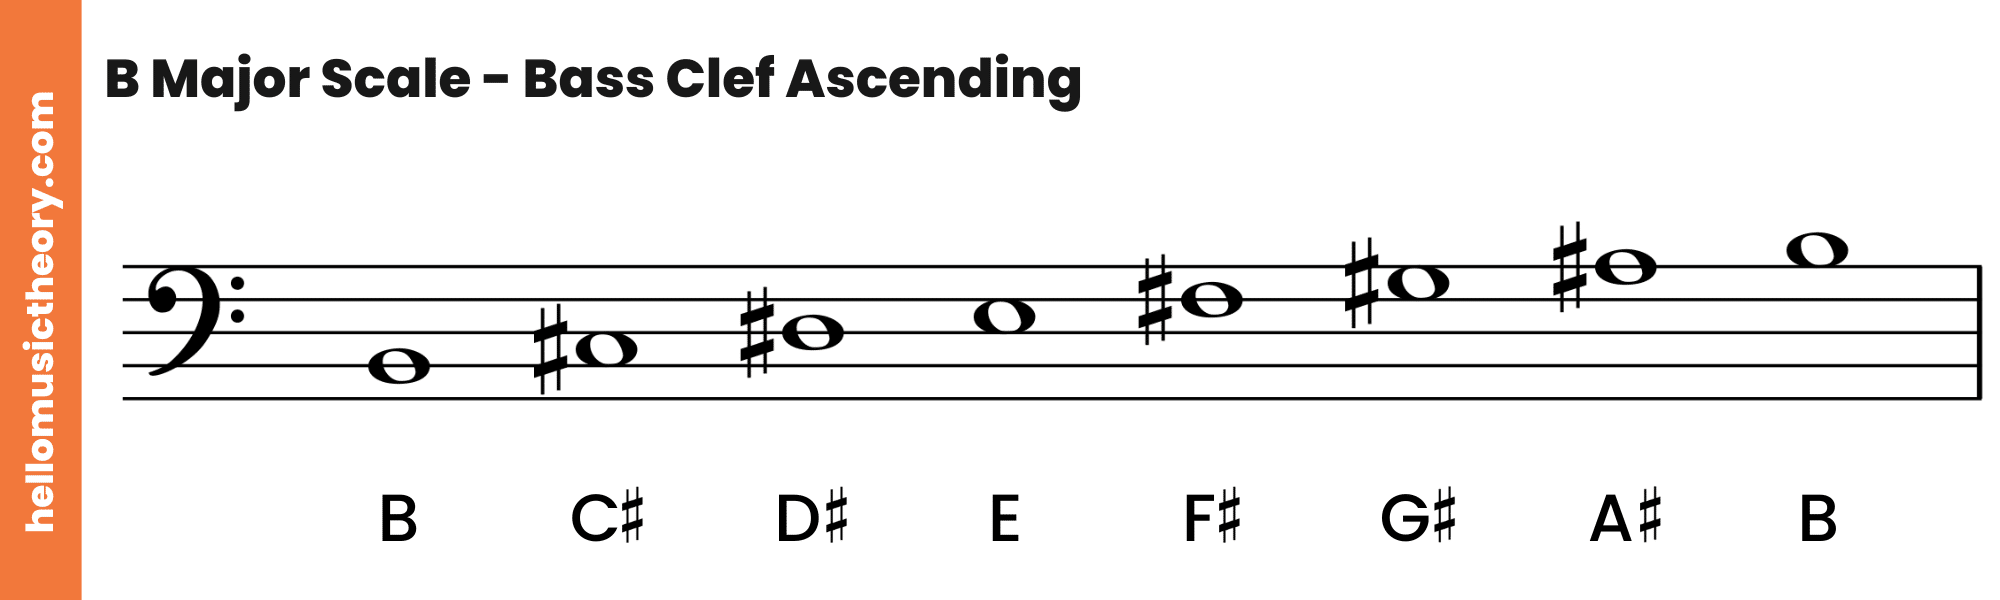 B Major Scale Bass Clef Ascending